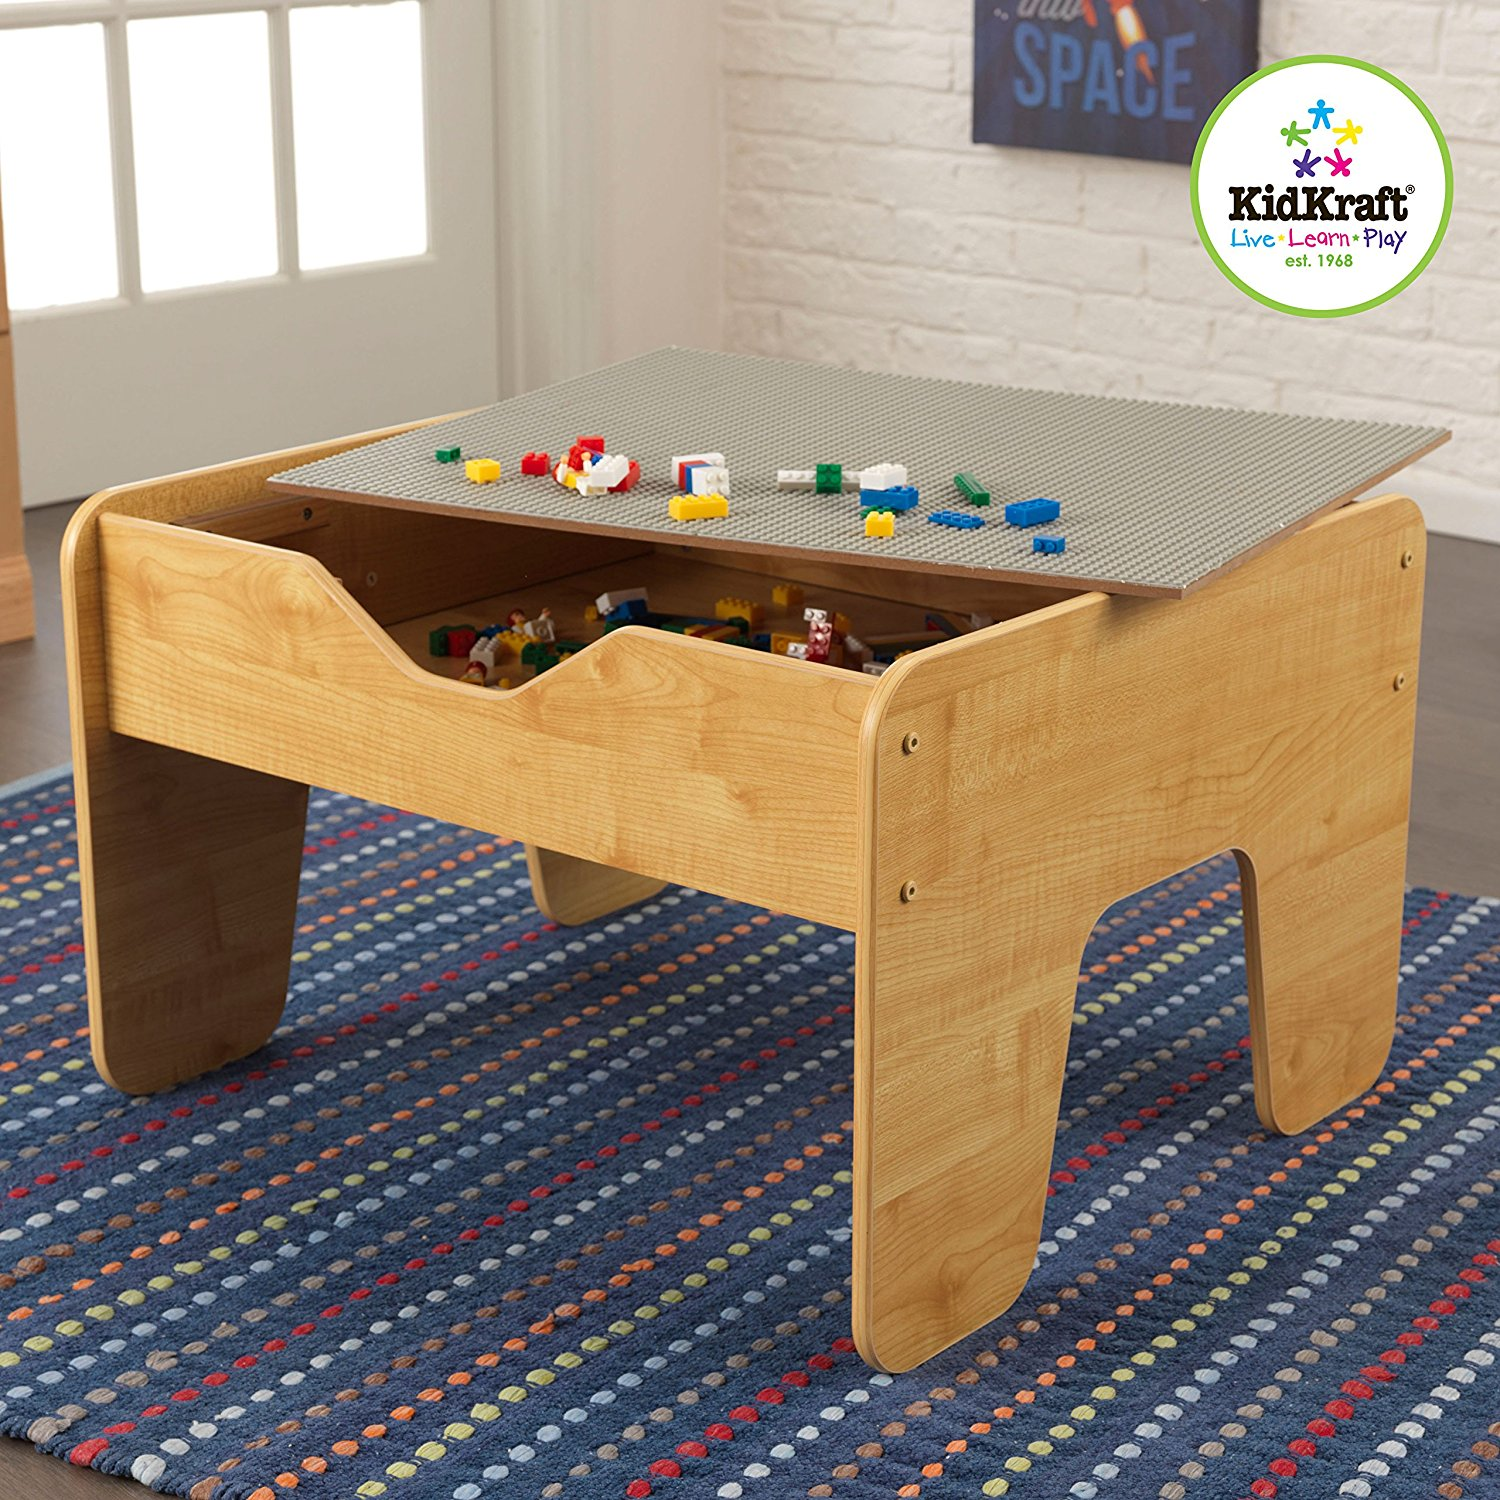 KidKraft 2-in-1 Activity Table with Board Only $72.24 Shipped!